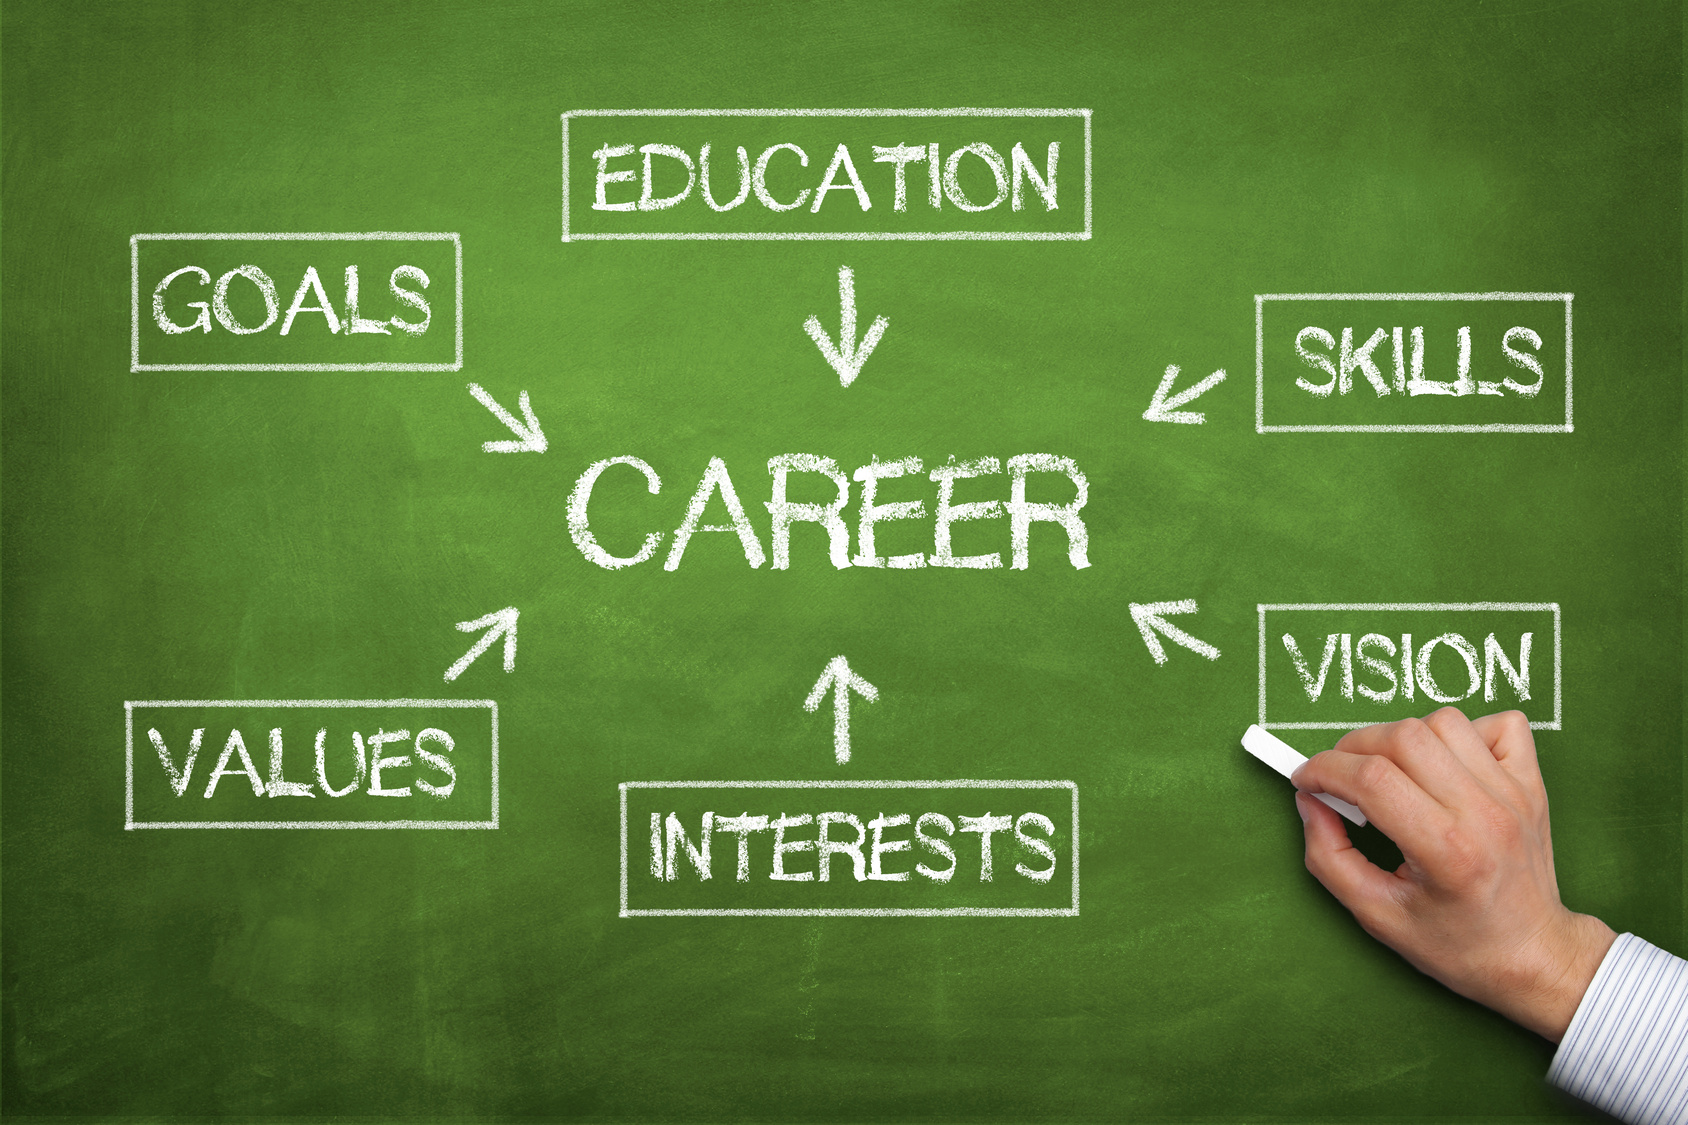  A person is drawing a mind map on a blackboard with the words 'education', 'goals', 'skills', 'vision', 'values', and 'interests' connected to the central word 'career'.